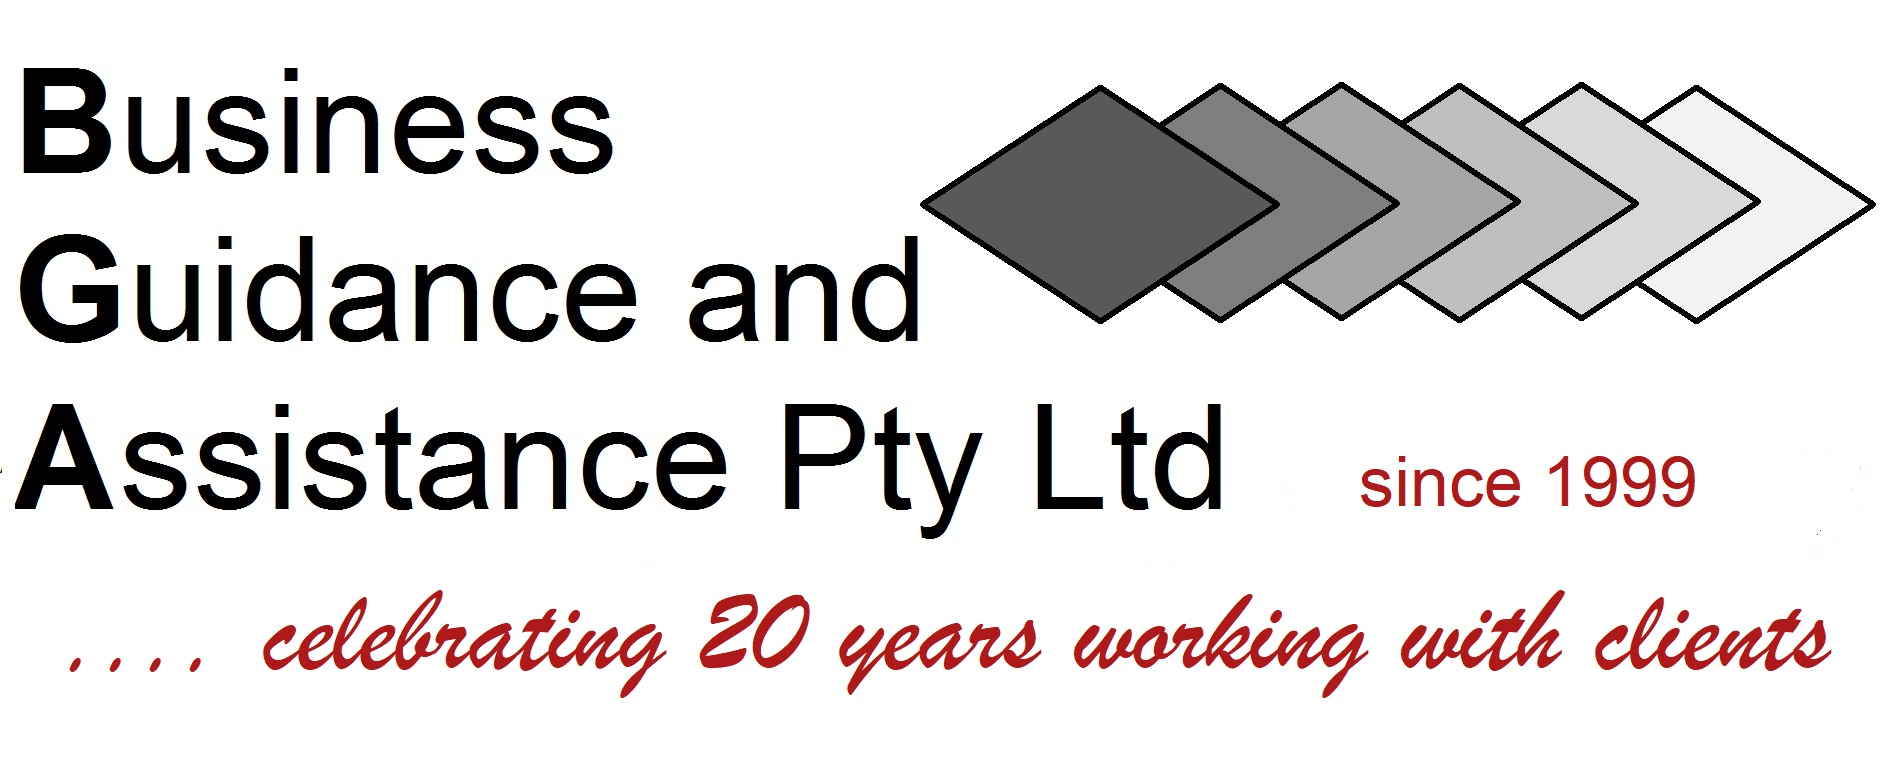 Business Guidance and Assistance Pty Ltd